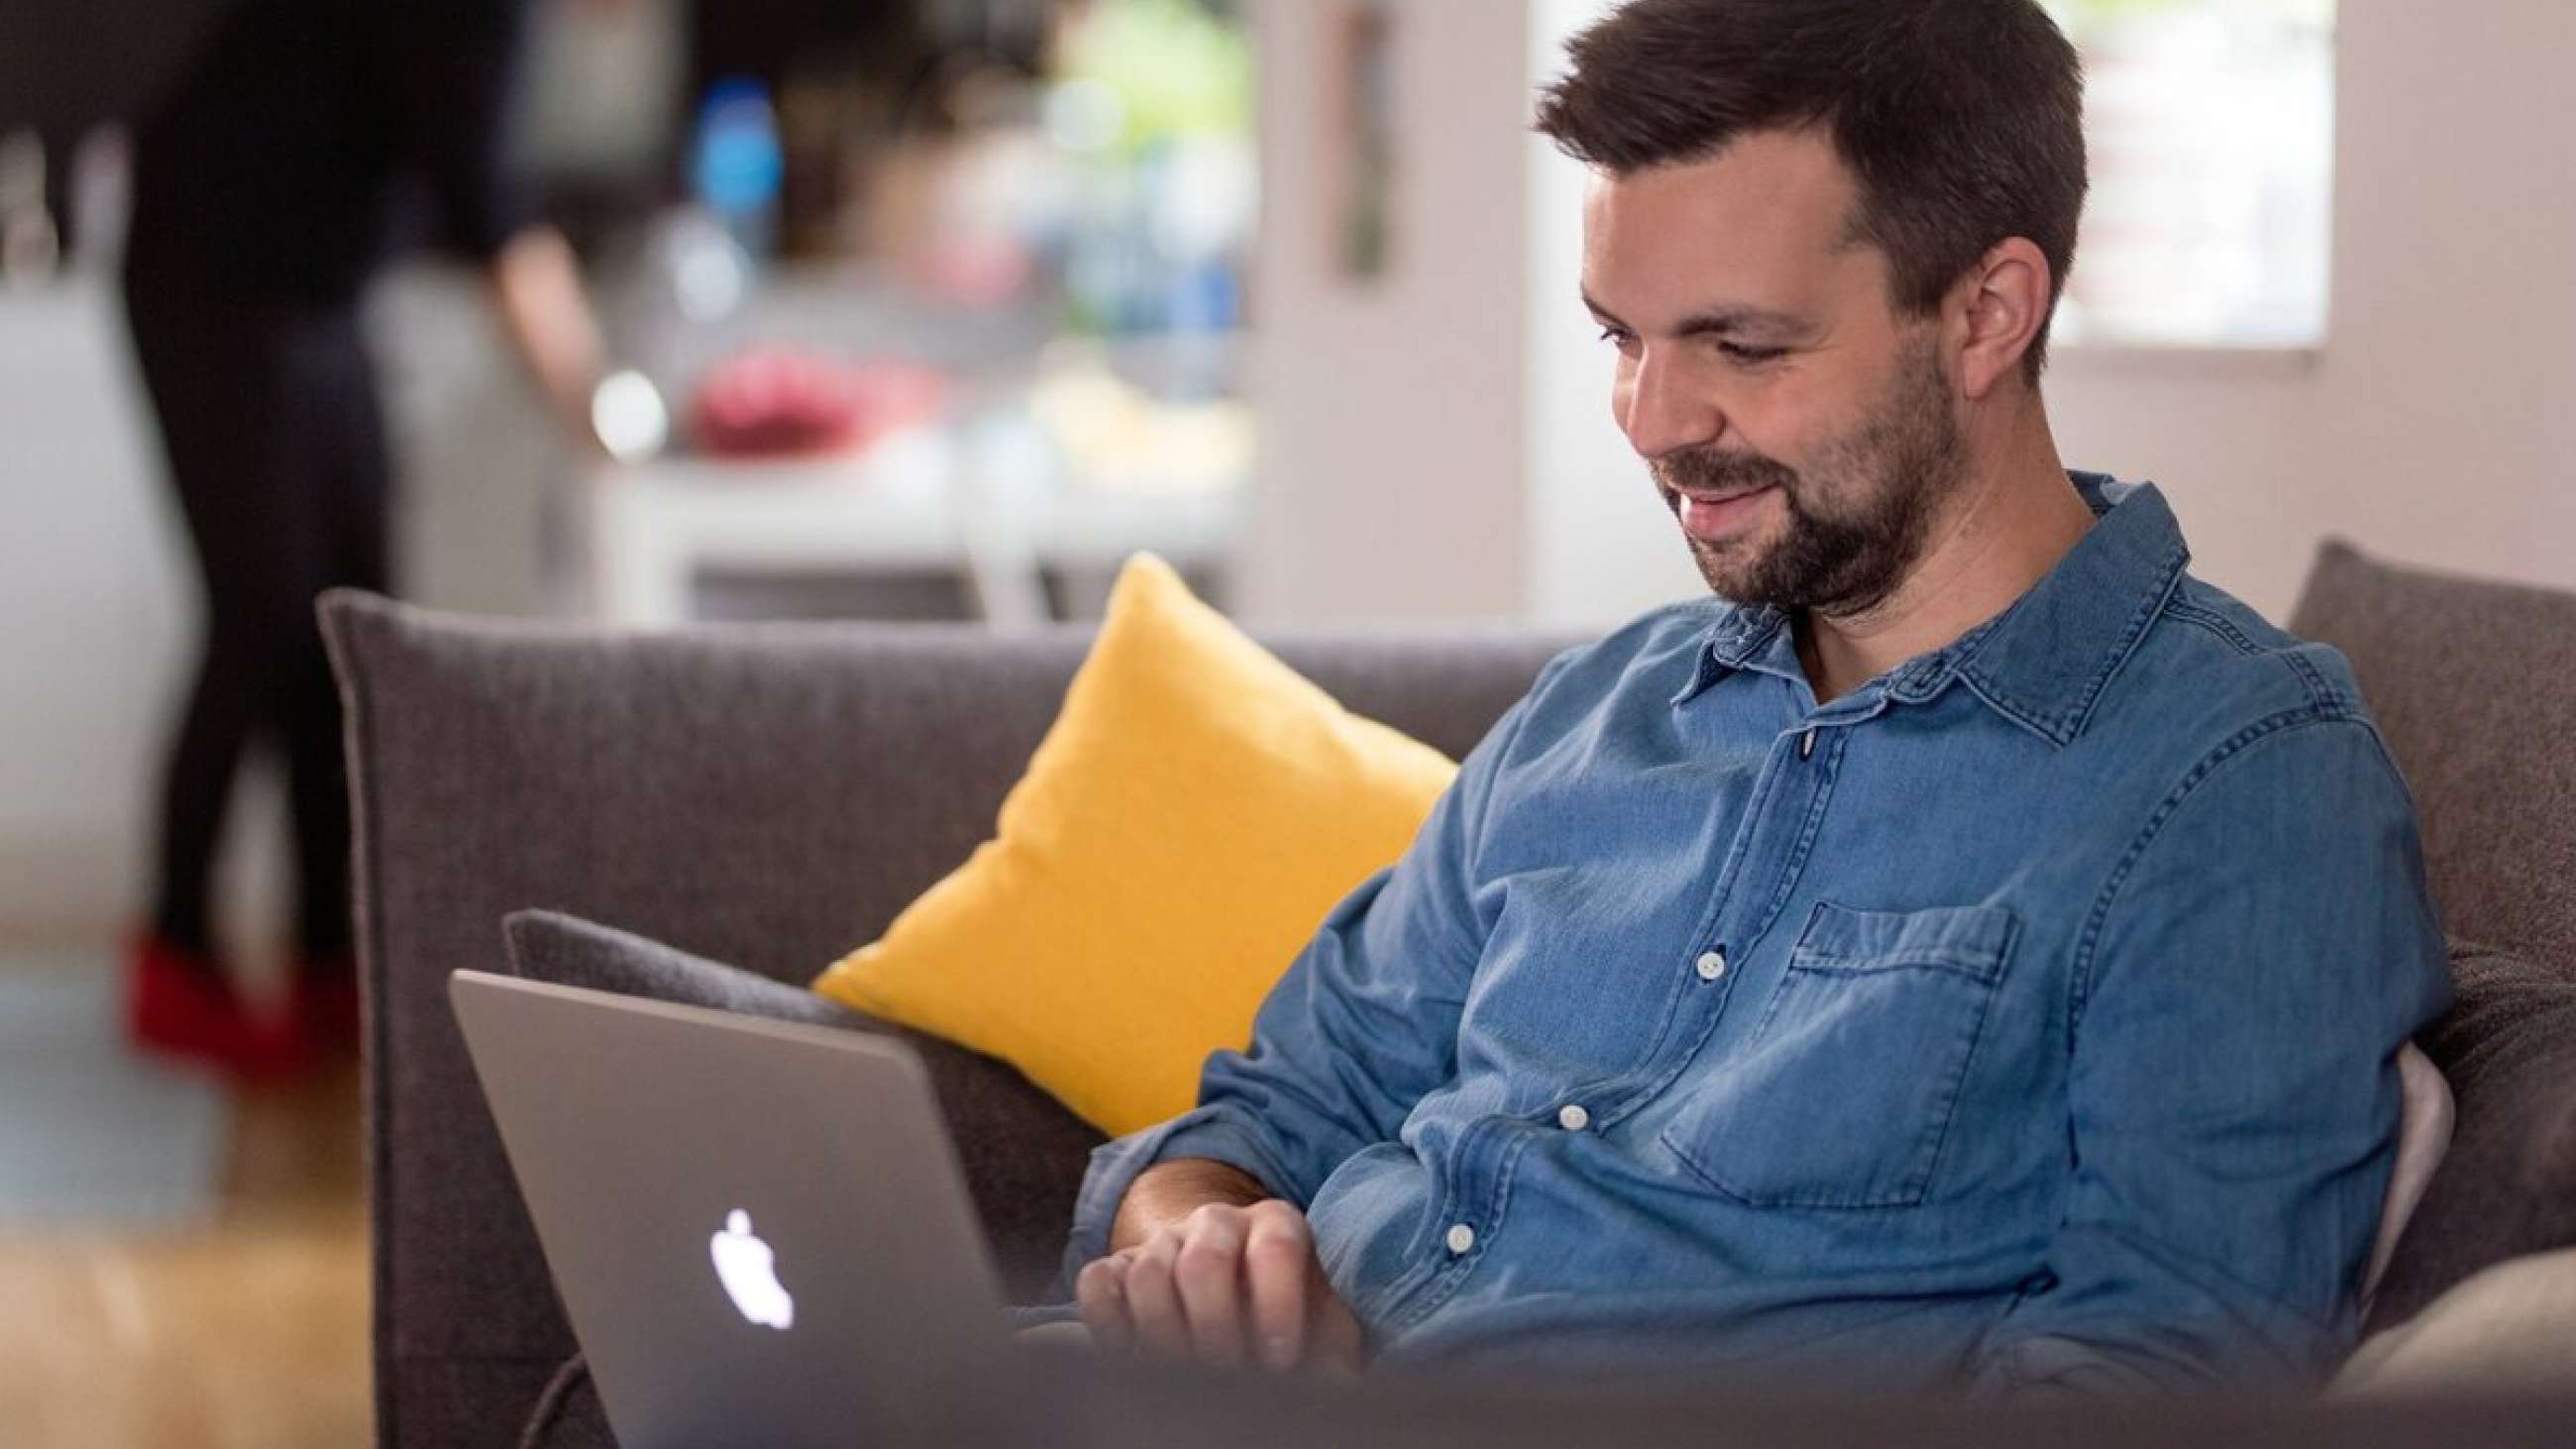 Young man with beard and denim shirt sitting on the sofa and smiling with a laptop in his lap.